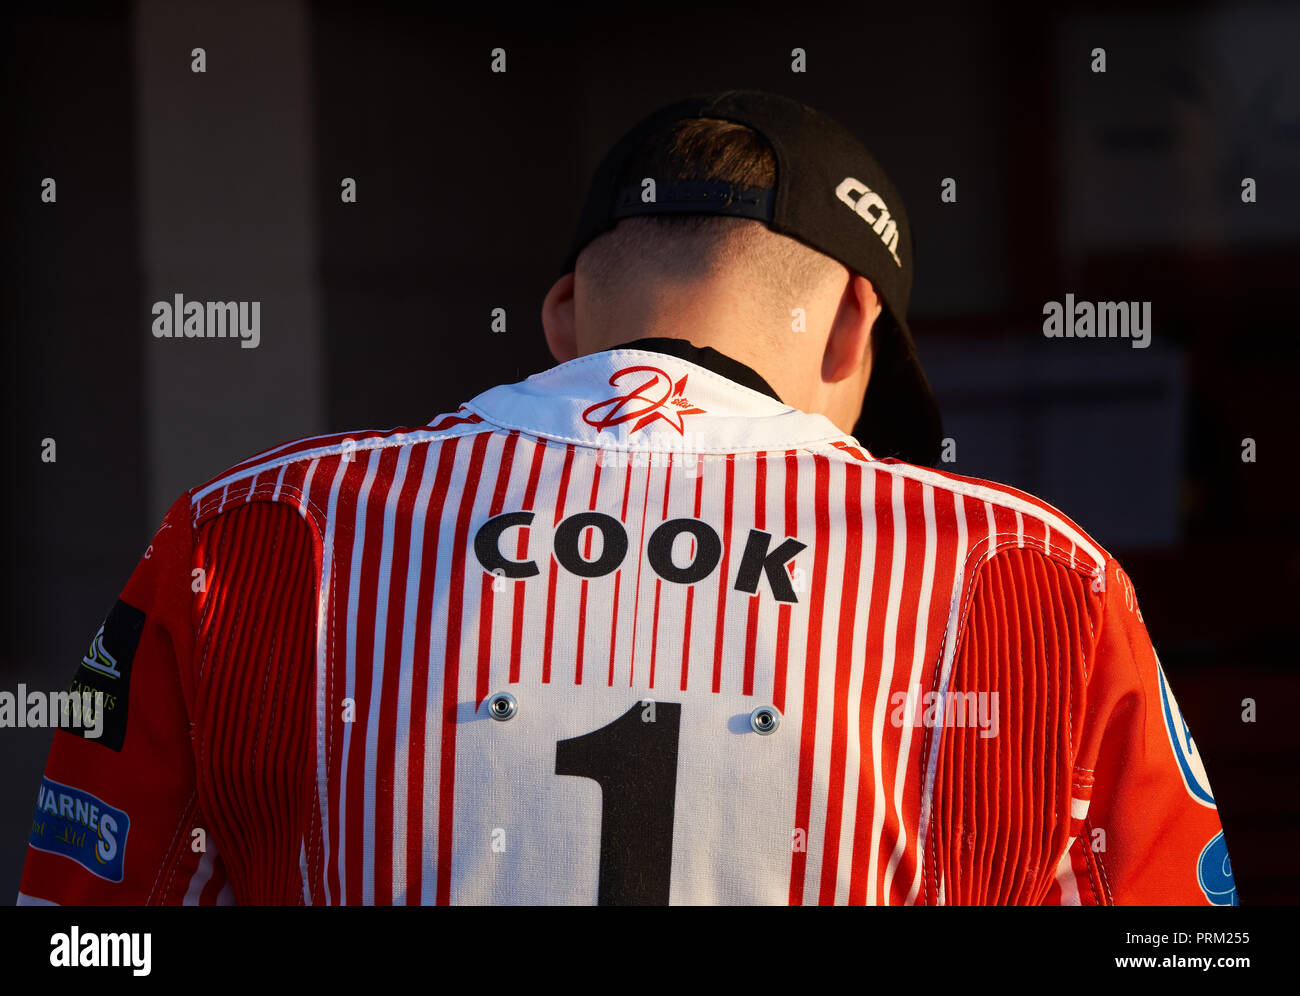 Craig Cook the leading Glasgow Tigers speedway rider before the match against Newcastle Diamonds. Stock Photo